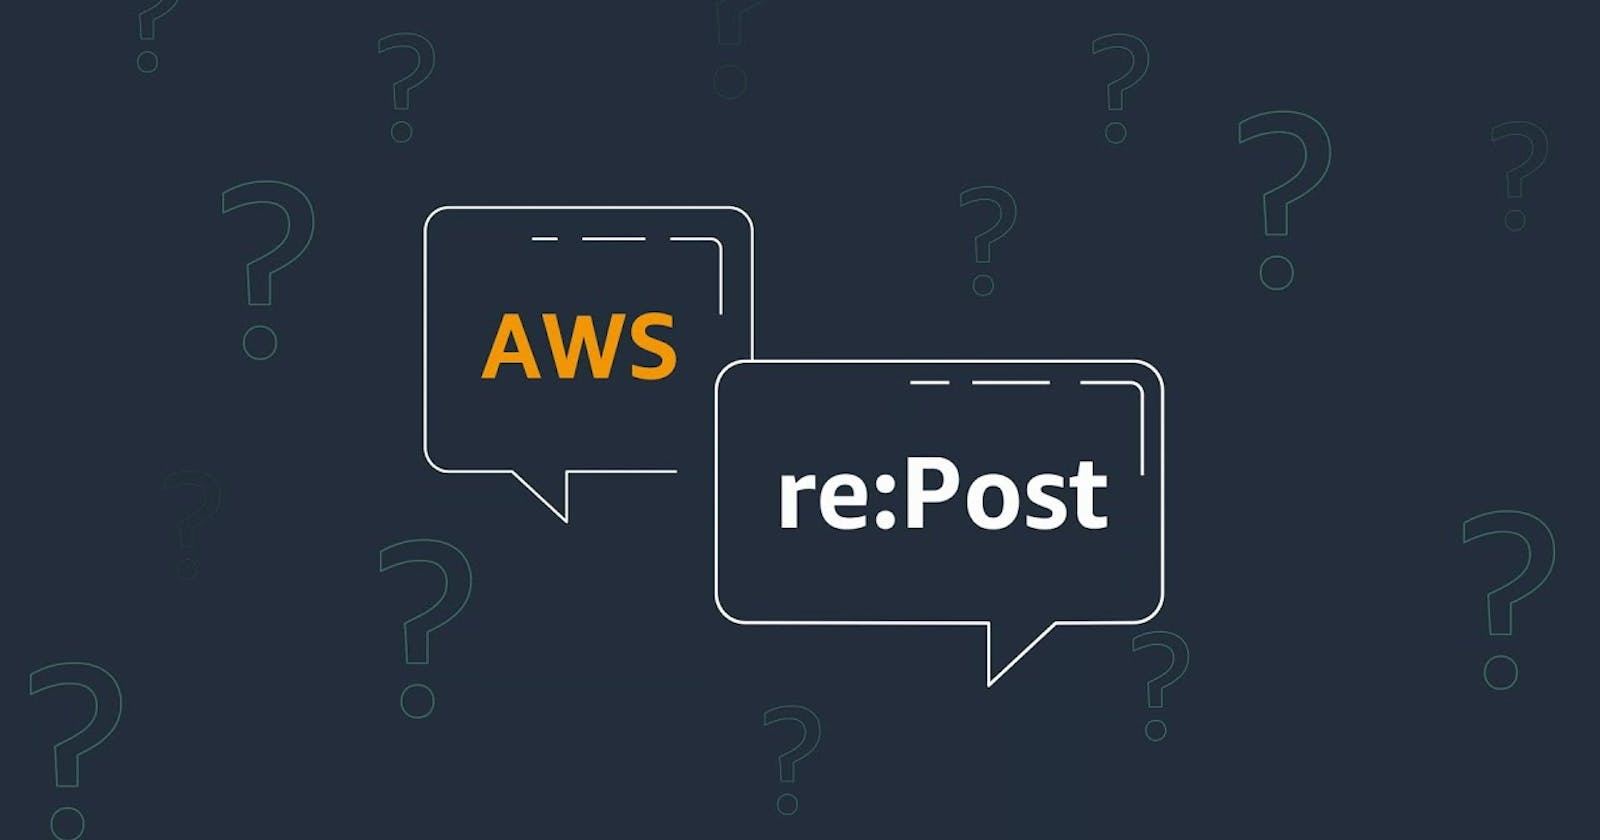 AWS re:Post: Empowering the AWS Community with Knowledge Sharing